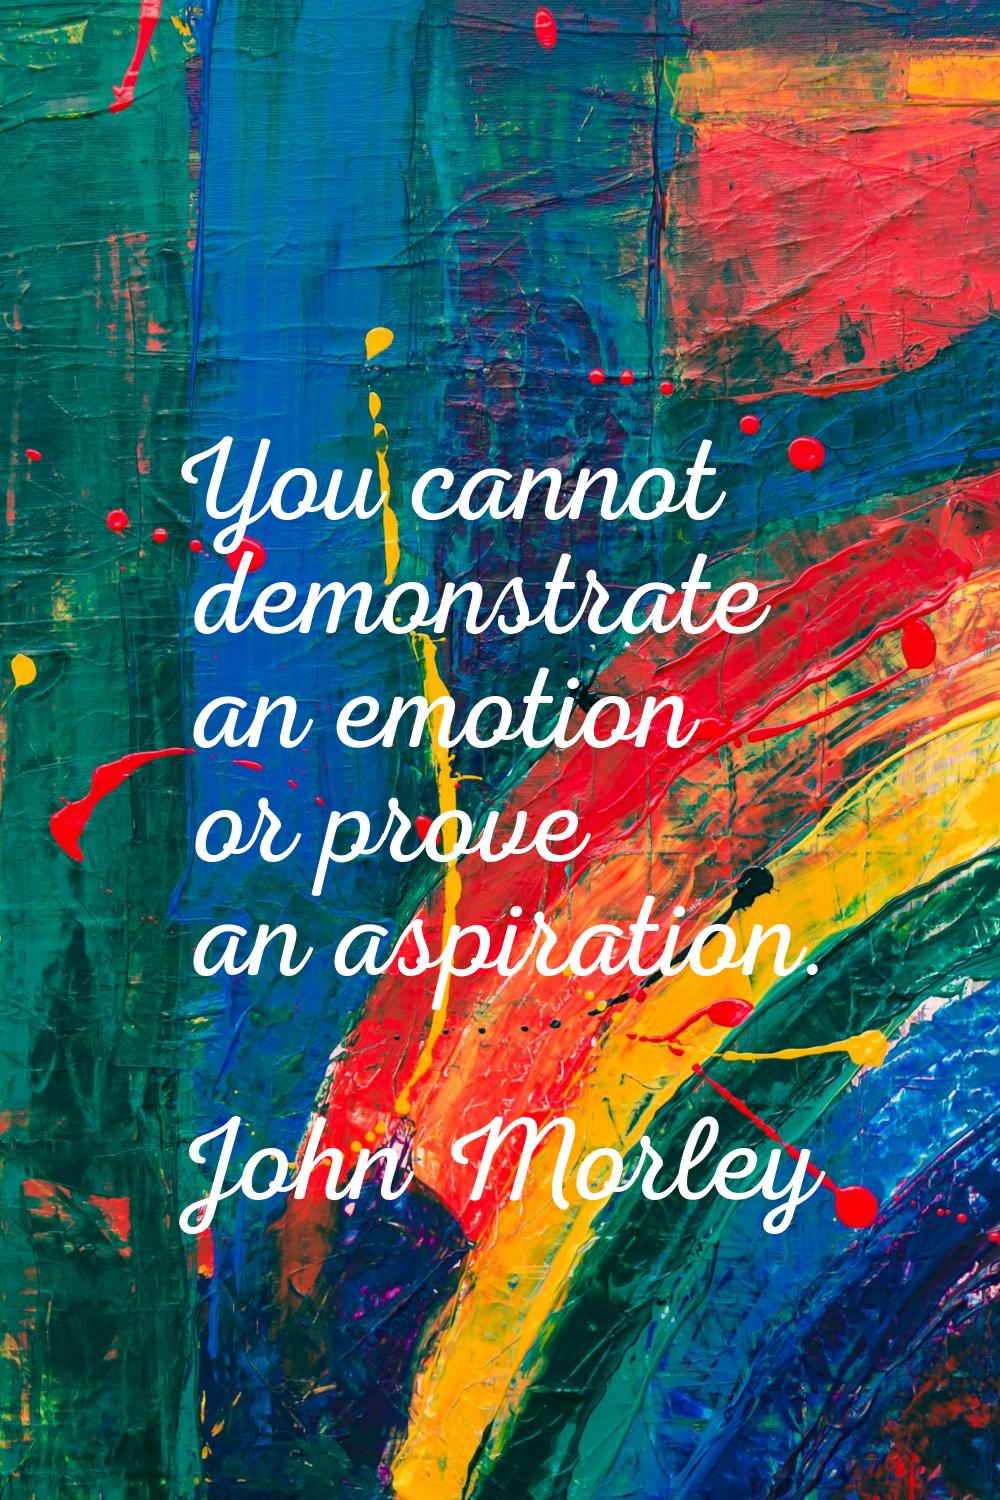 You cannot demonstrate an emotion or prove an aspiration.